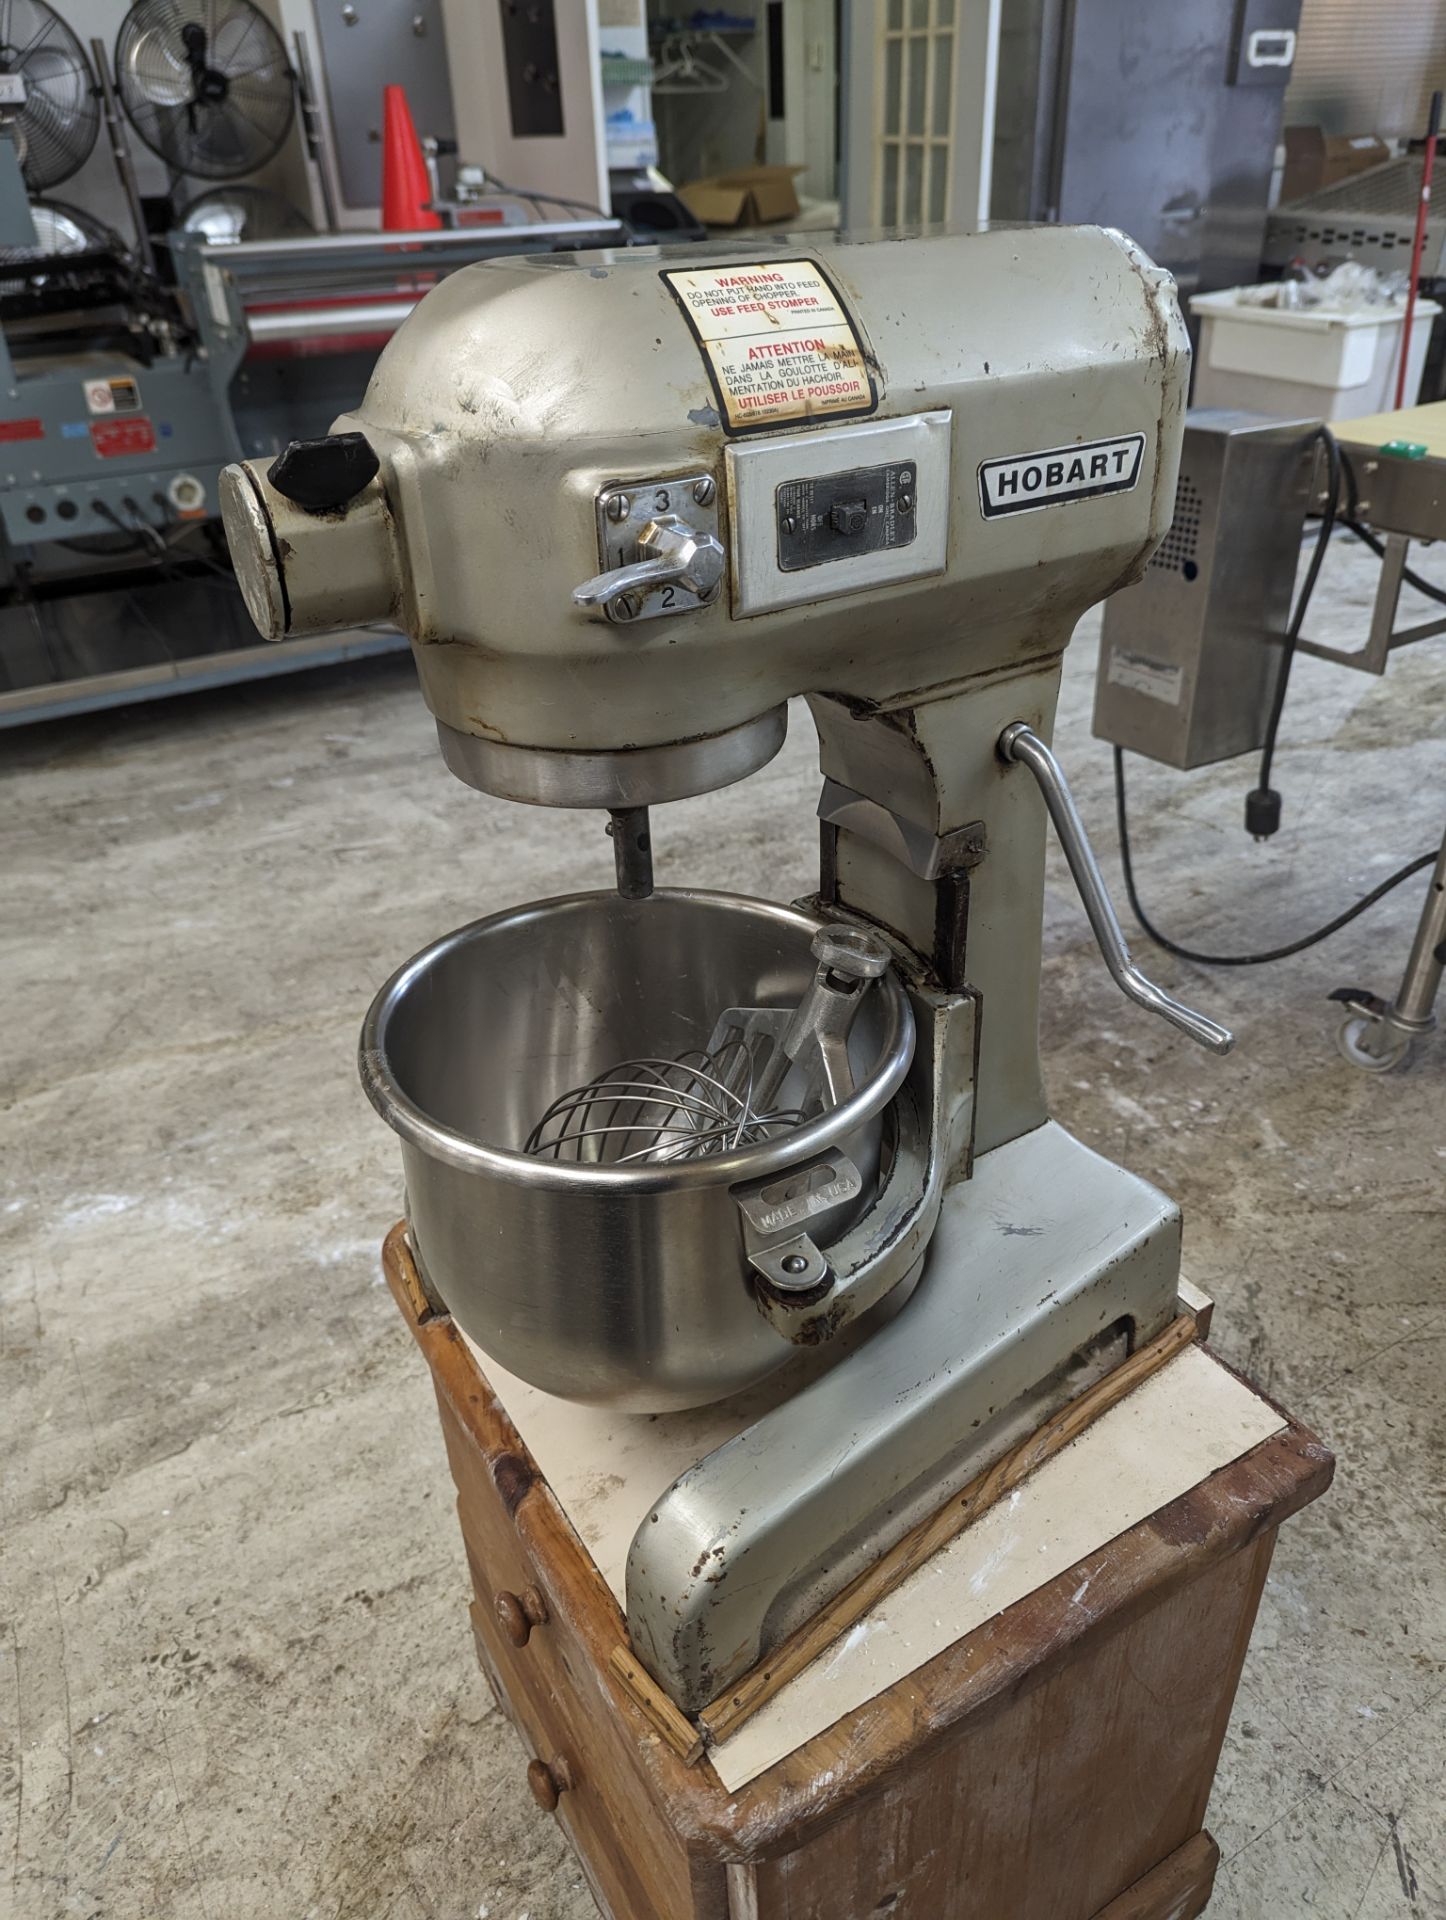 Hobart 12 Quart Mixer with Bowl and 2 Attachments